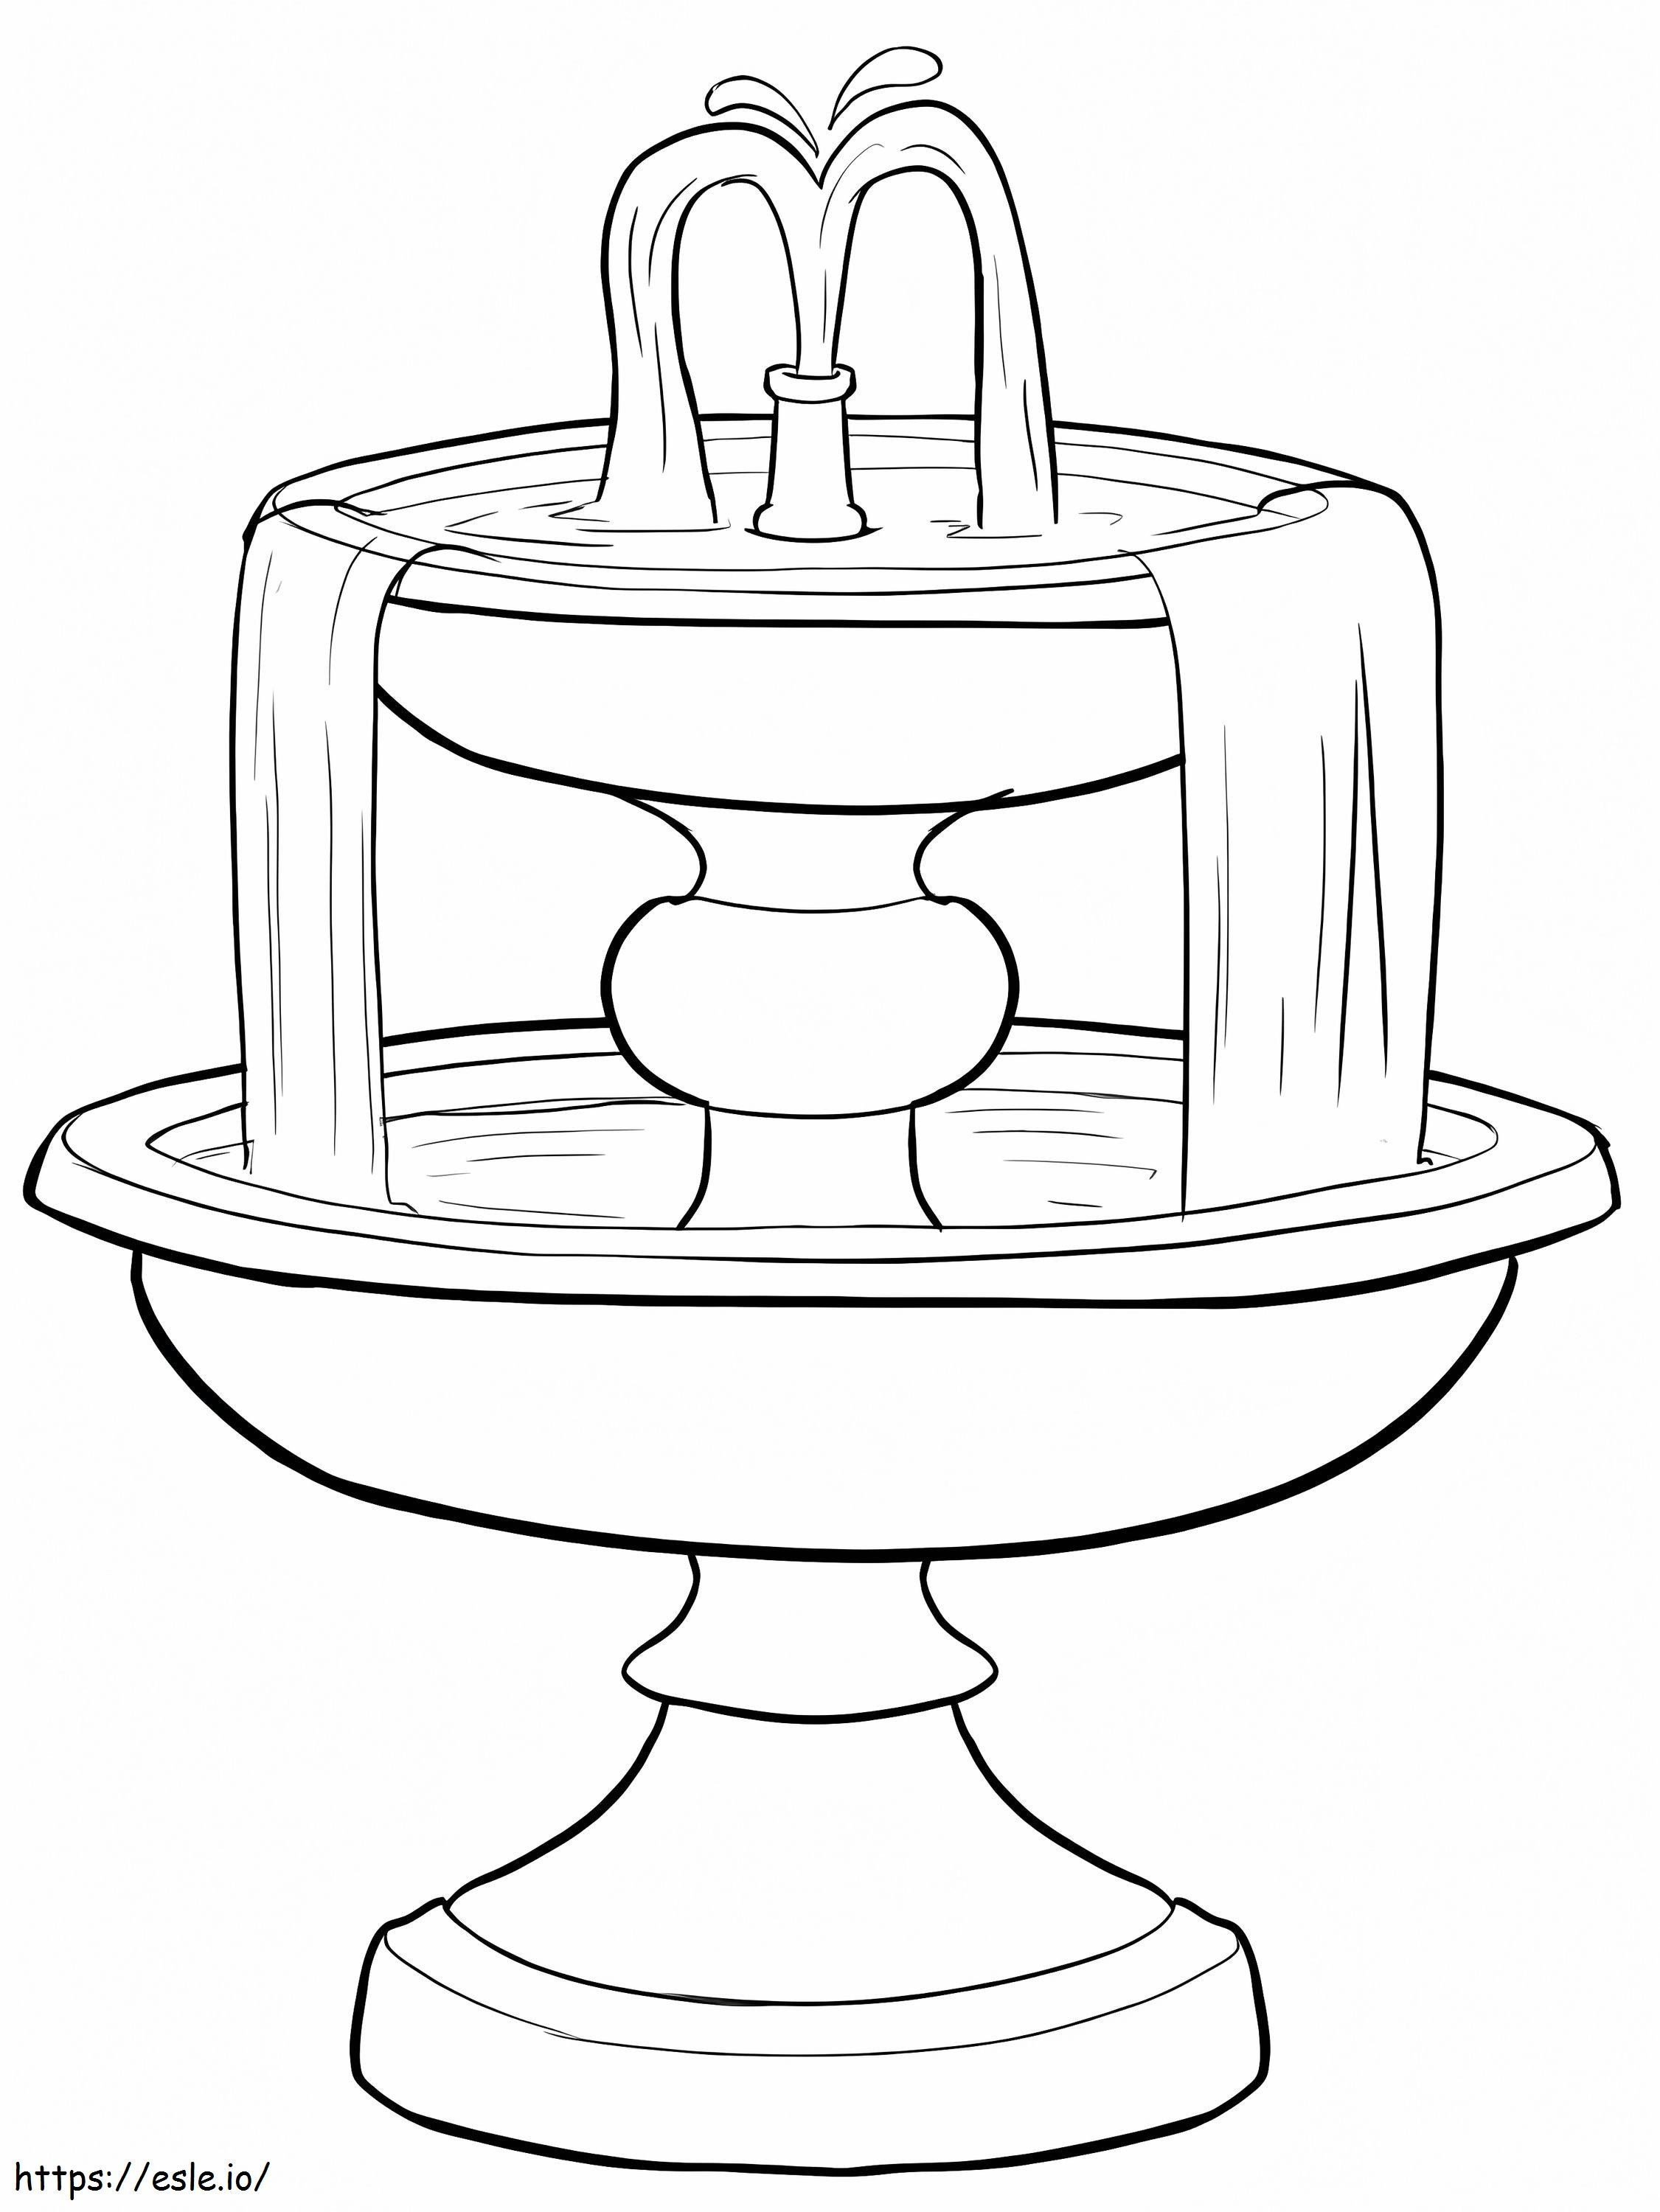 Water Fountain coloring page